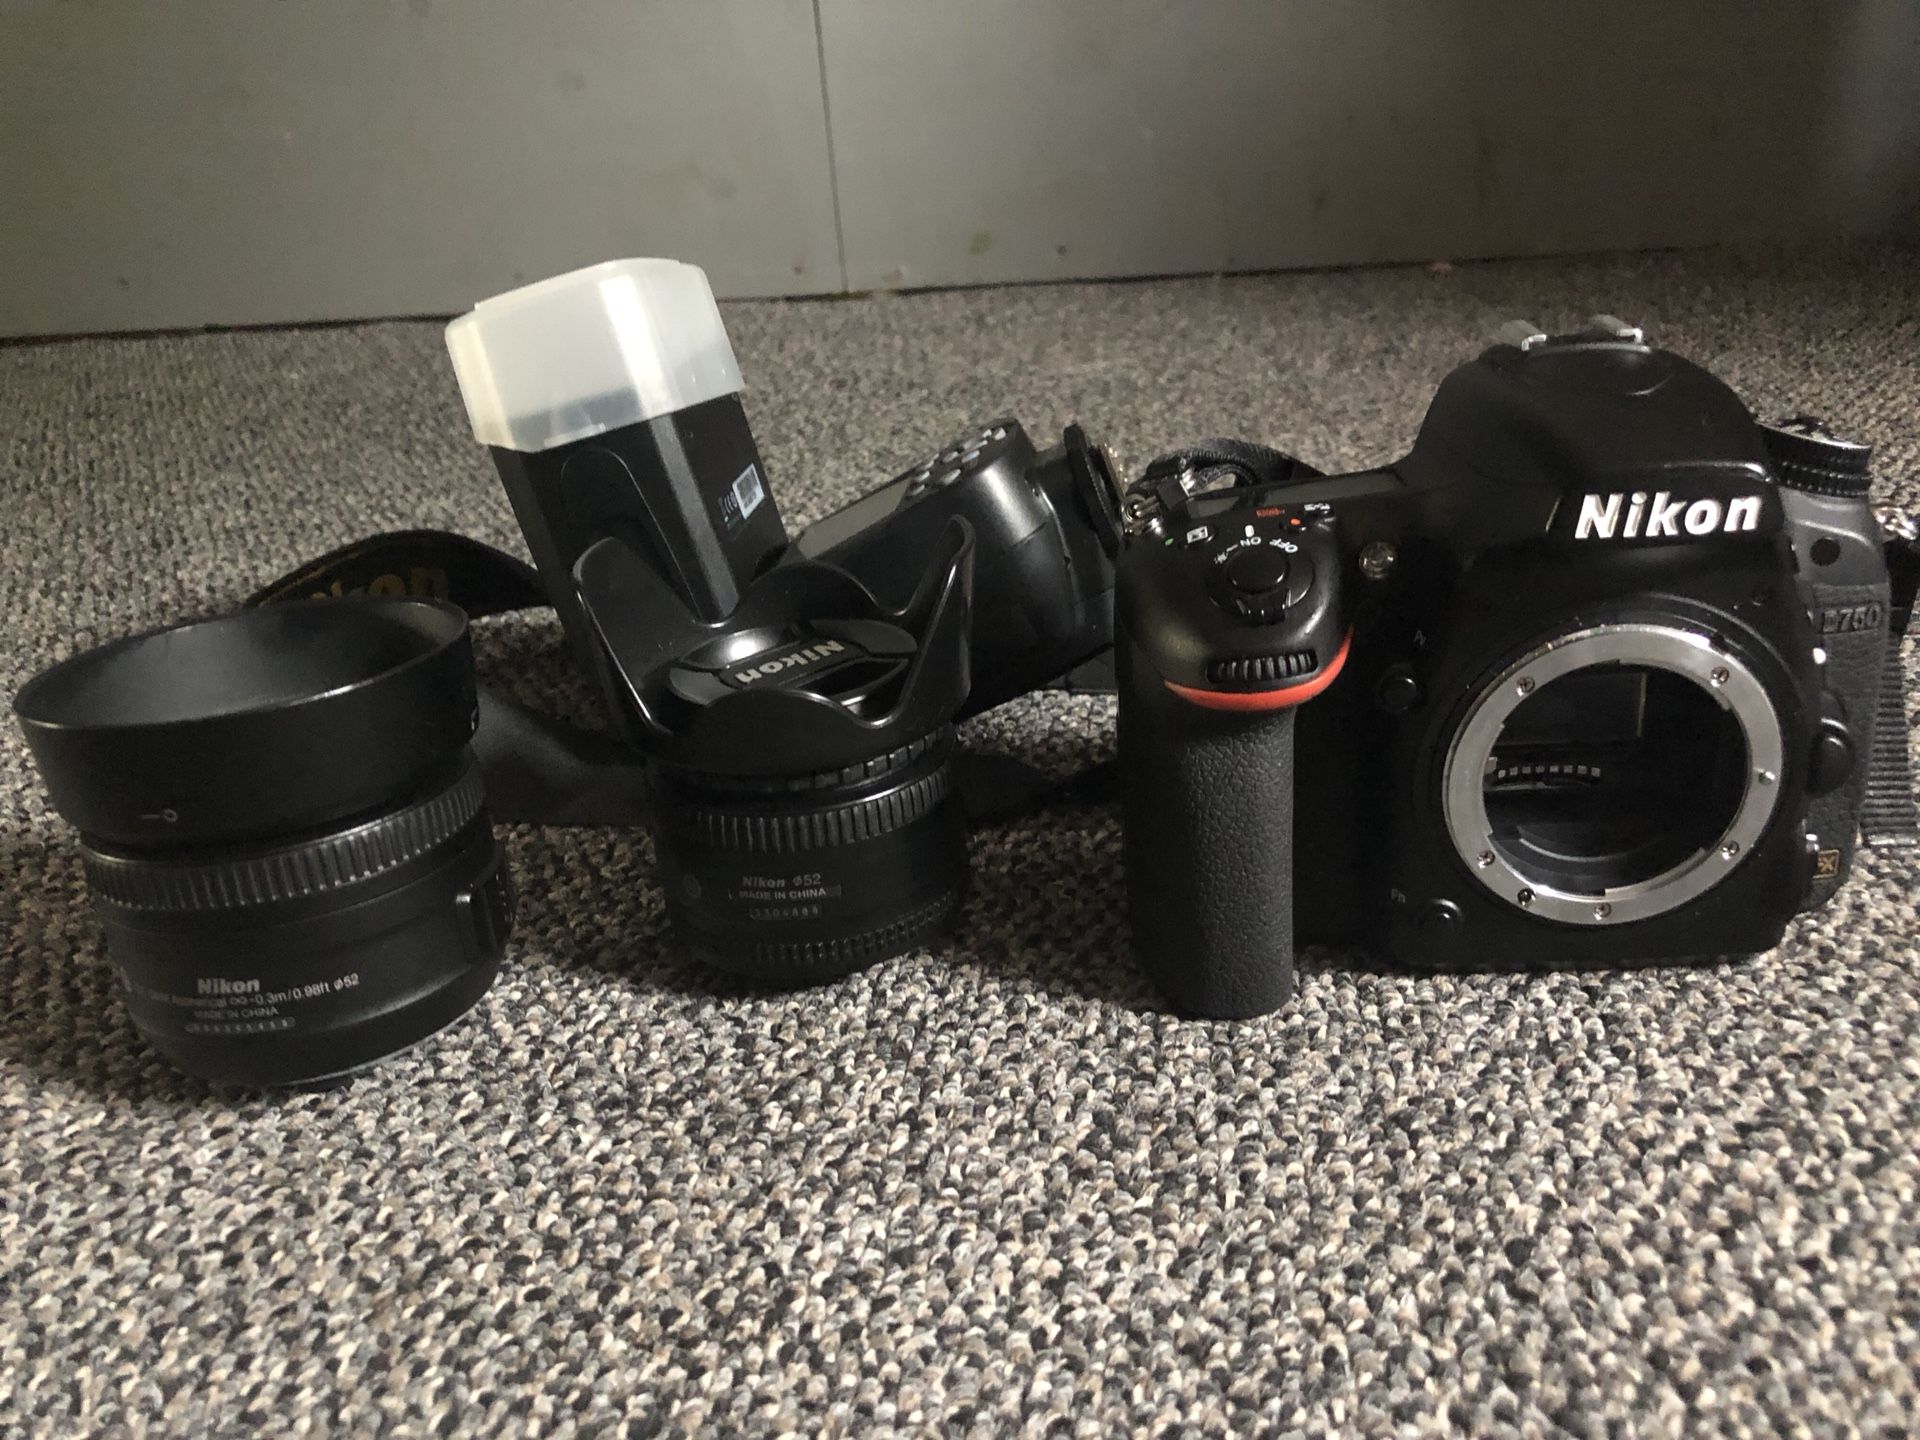 NIKON D750 AND 3 LENSES AS WELL